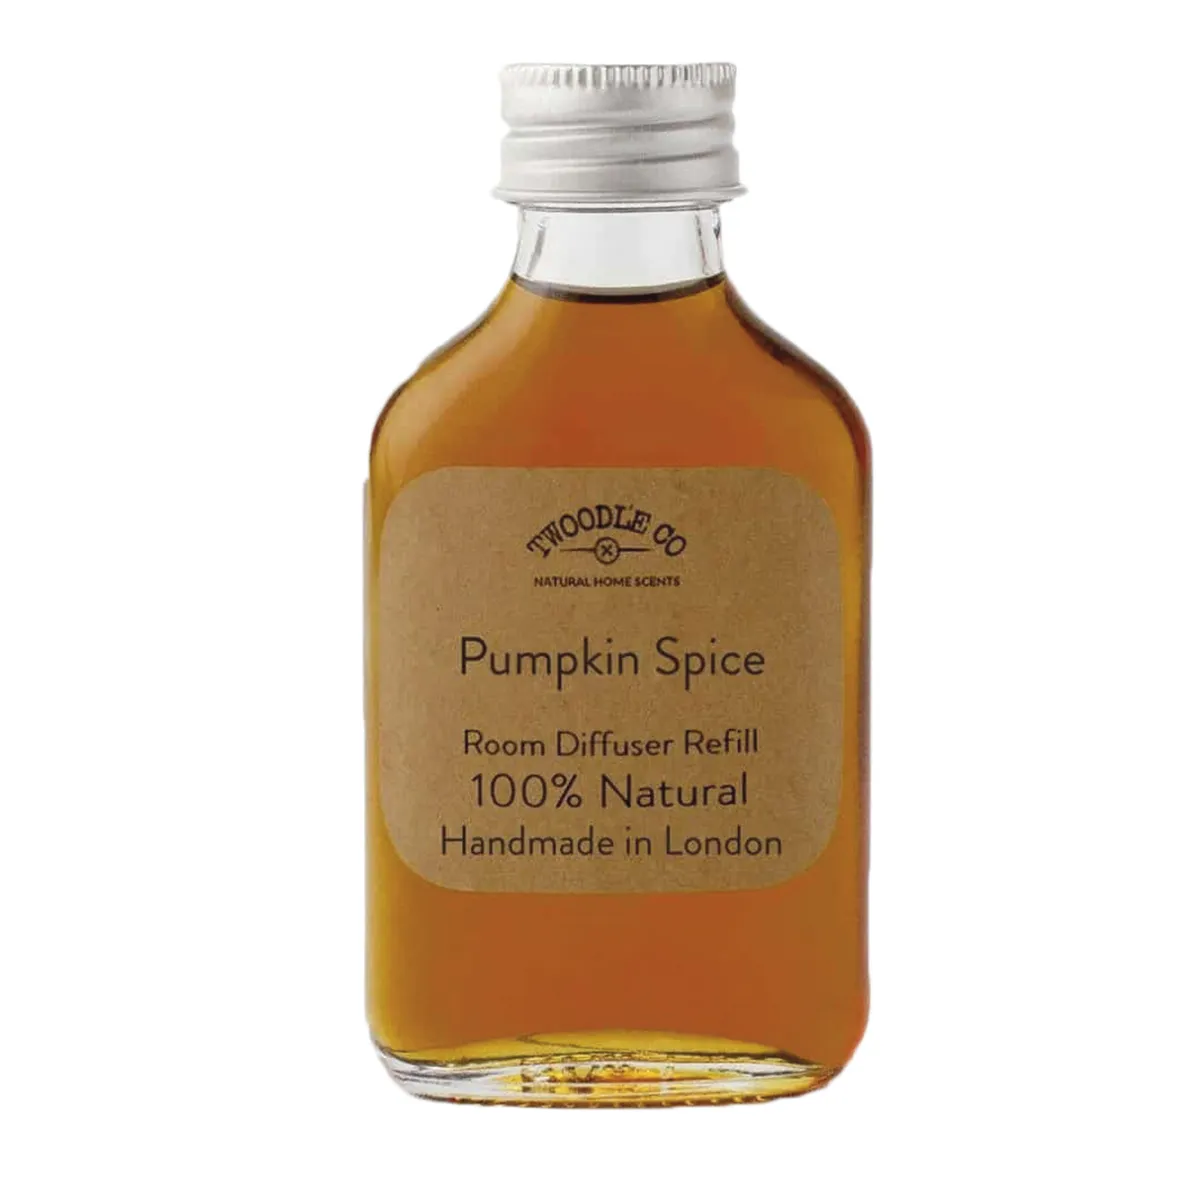 Pumpkin Spice 100ml diffuser refill, £32, Twoodle co